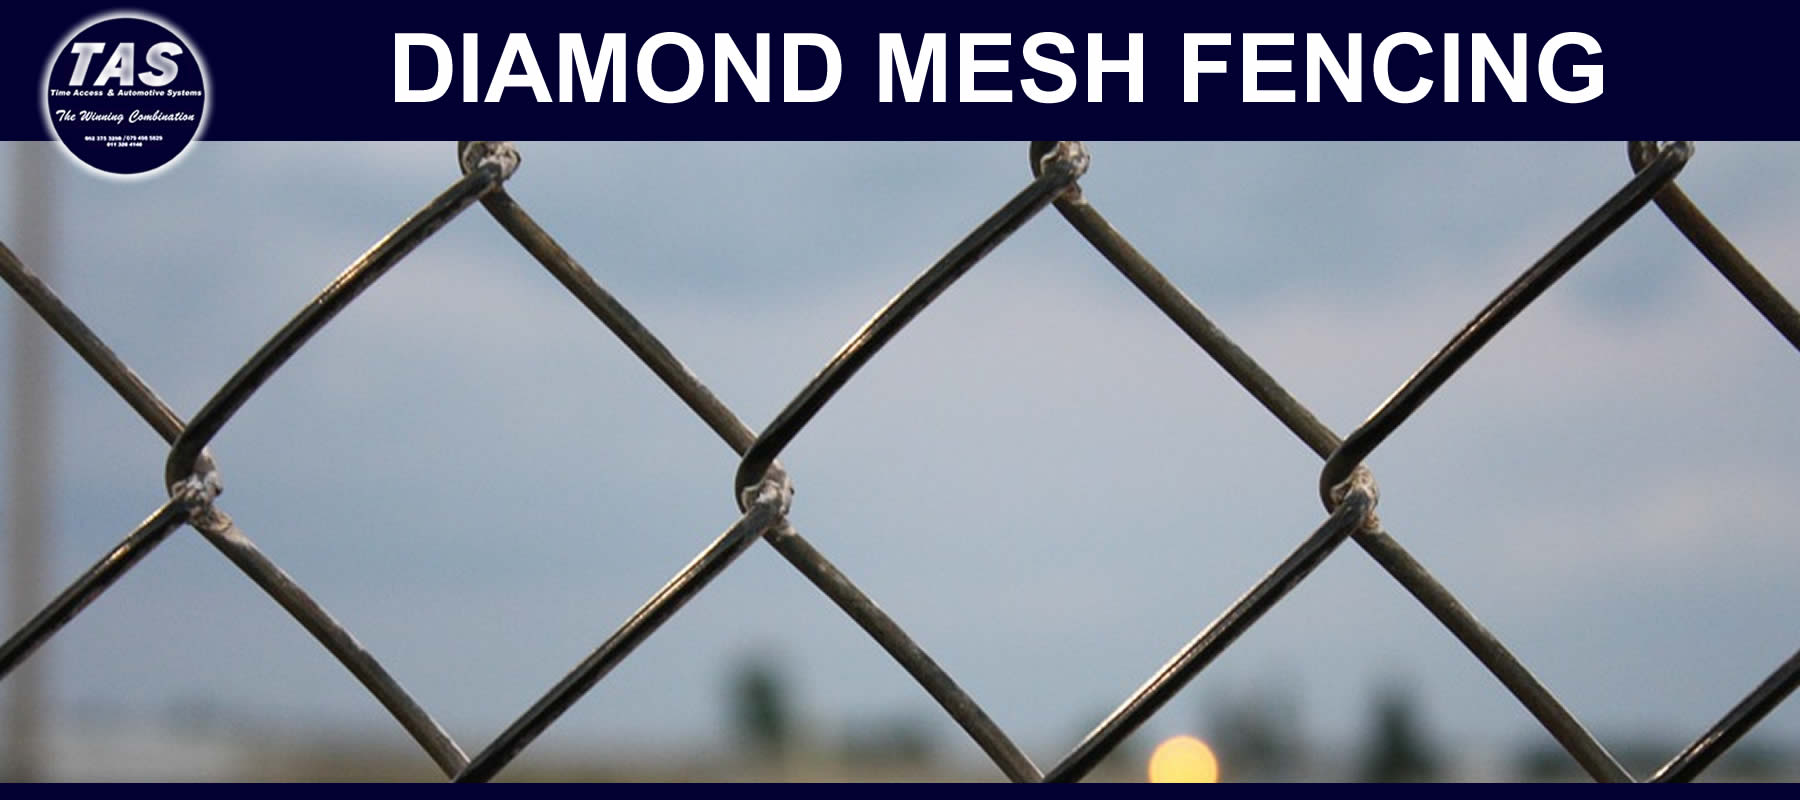 Diamond Mesh fencing security control banner